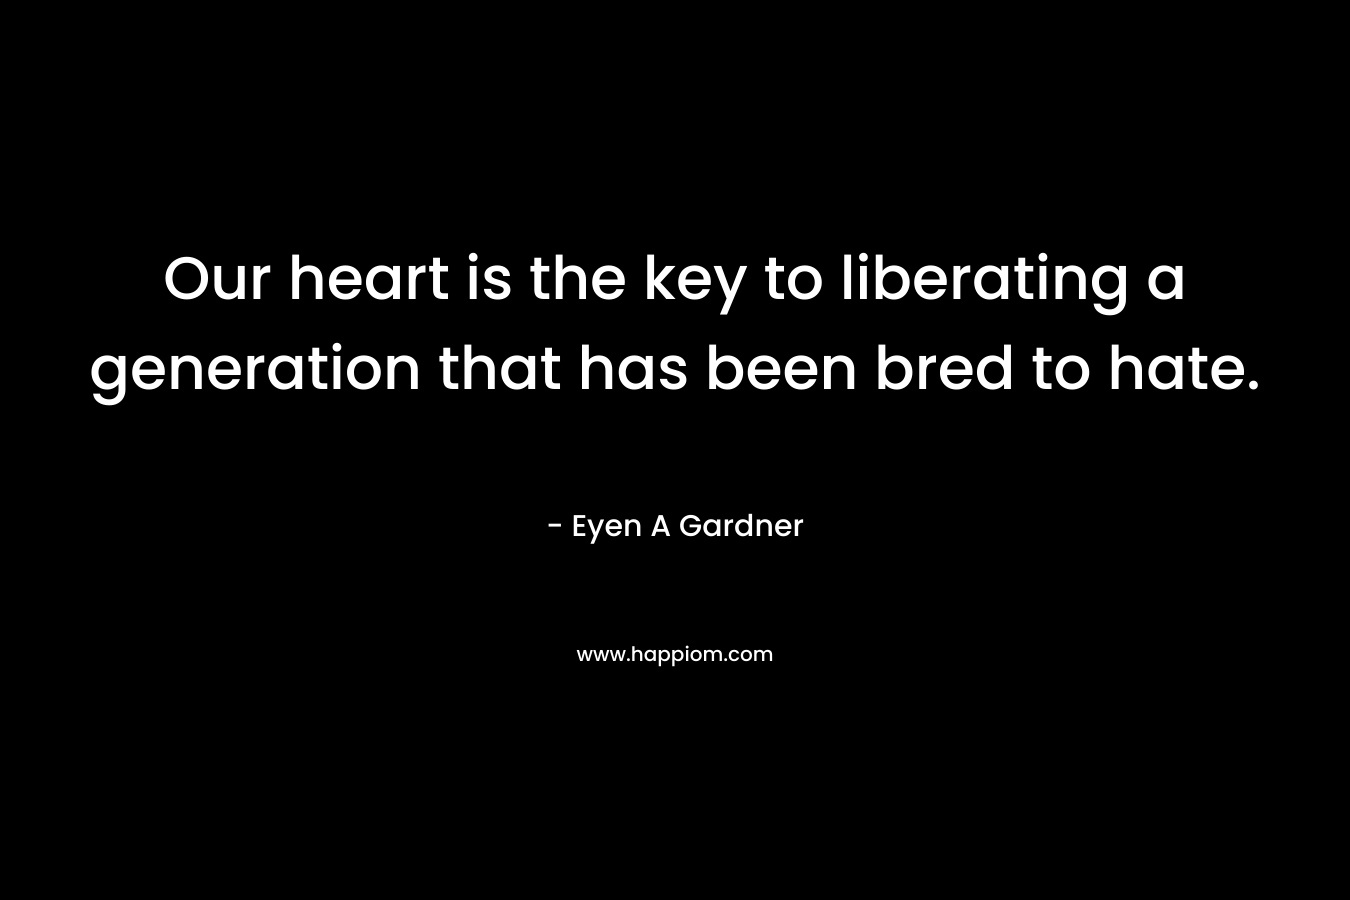 Our heart is the key to liberating a generation that has been bred to hate. – Eyen A Gardner